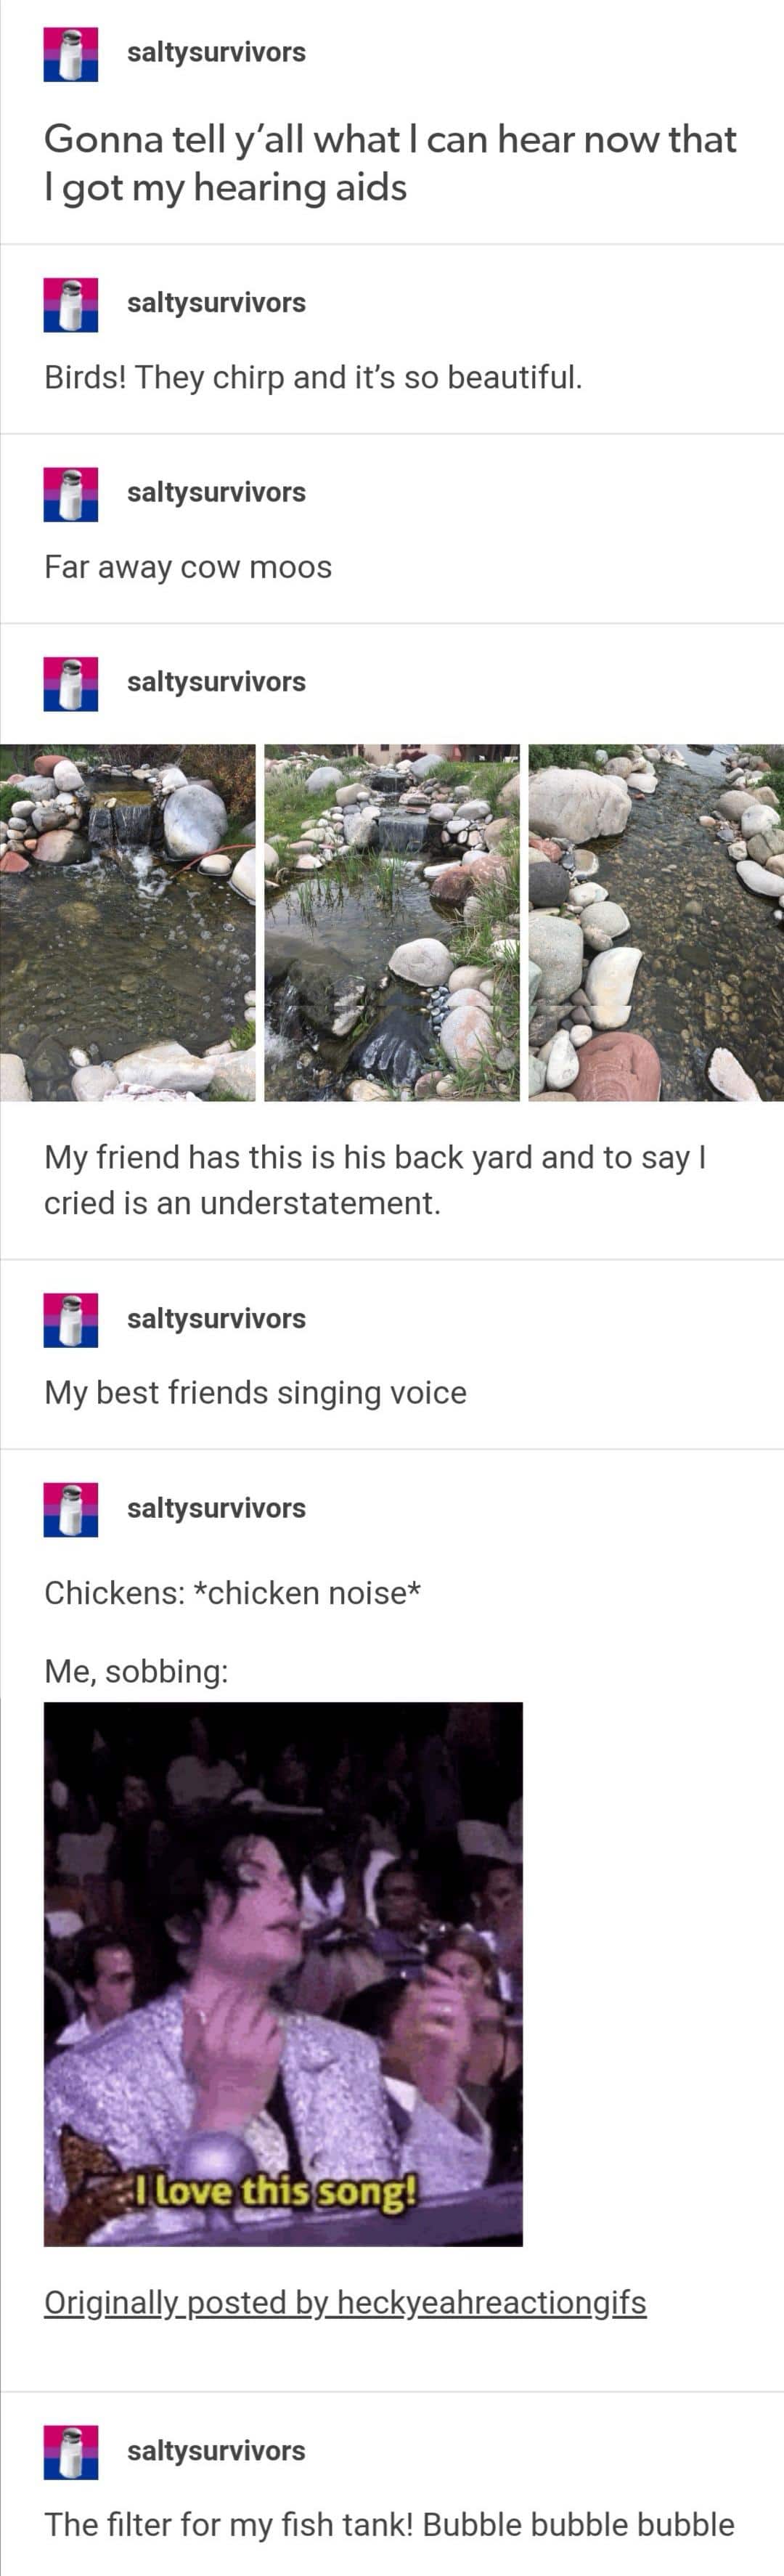 cute wholesome-memes cute text: saltysurvivors Gonna tell y'all what I can hear now that I got my hearing aids saltysurvivors Birds! They chirp and it's so beautiful. saltysurvivors Far away cow moos saltysurvivors My friend has this is his back yard and to say I cried is an understatement. saltysurvivors My best friends singing voice saltysurvivors Chickens: *chicken noise* Me, sobbing: love this,song!— Originally_posted by heckyeahreactionglfs saltysurvivors The filter for my fish tank! Bubble bubble bubble 